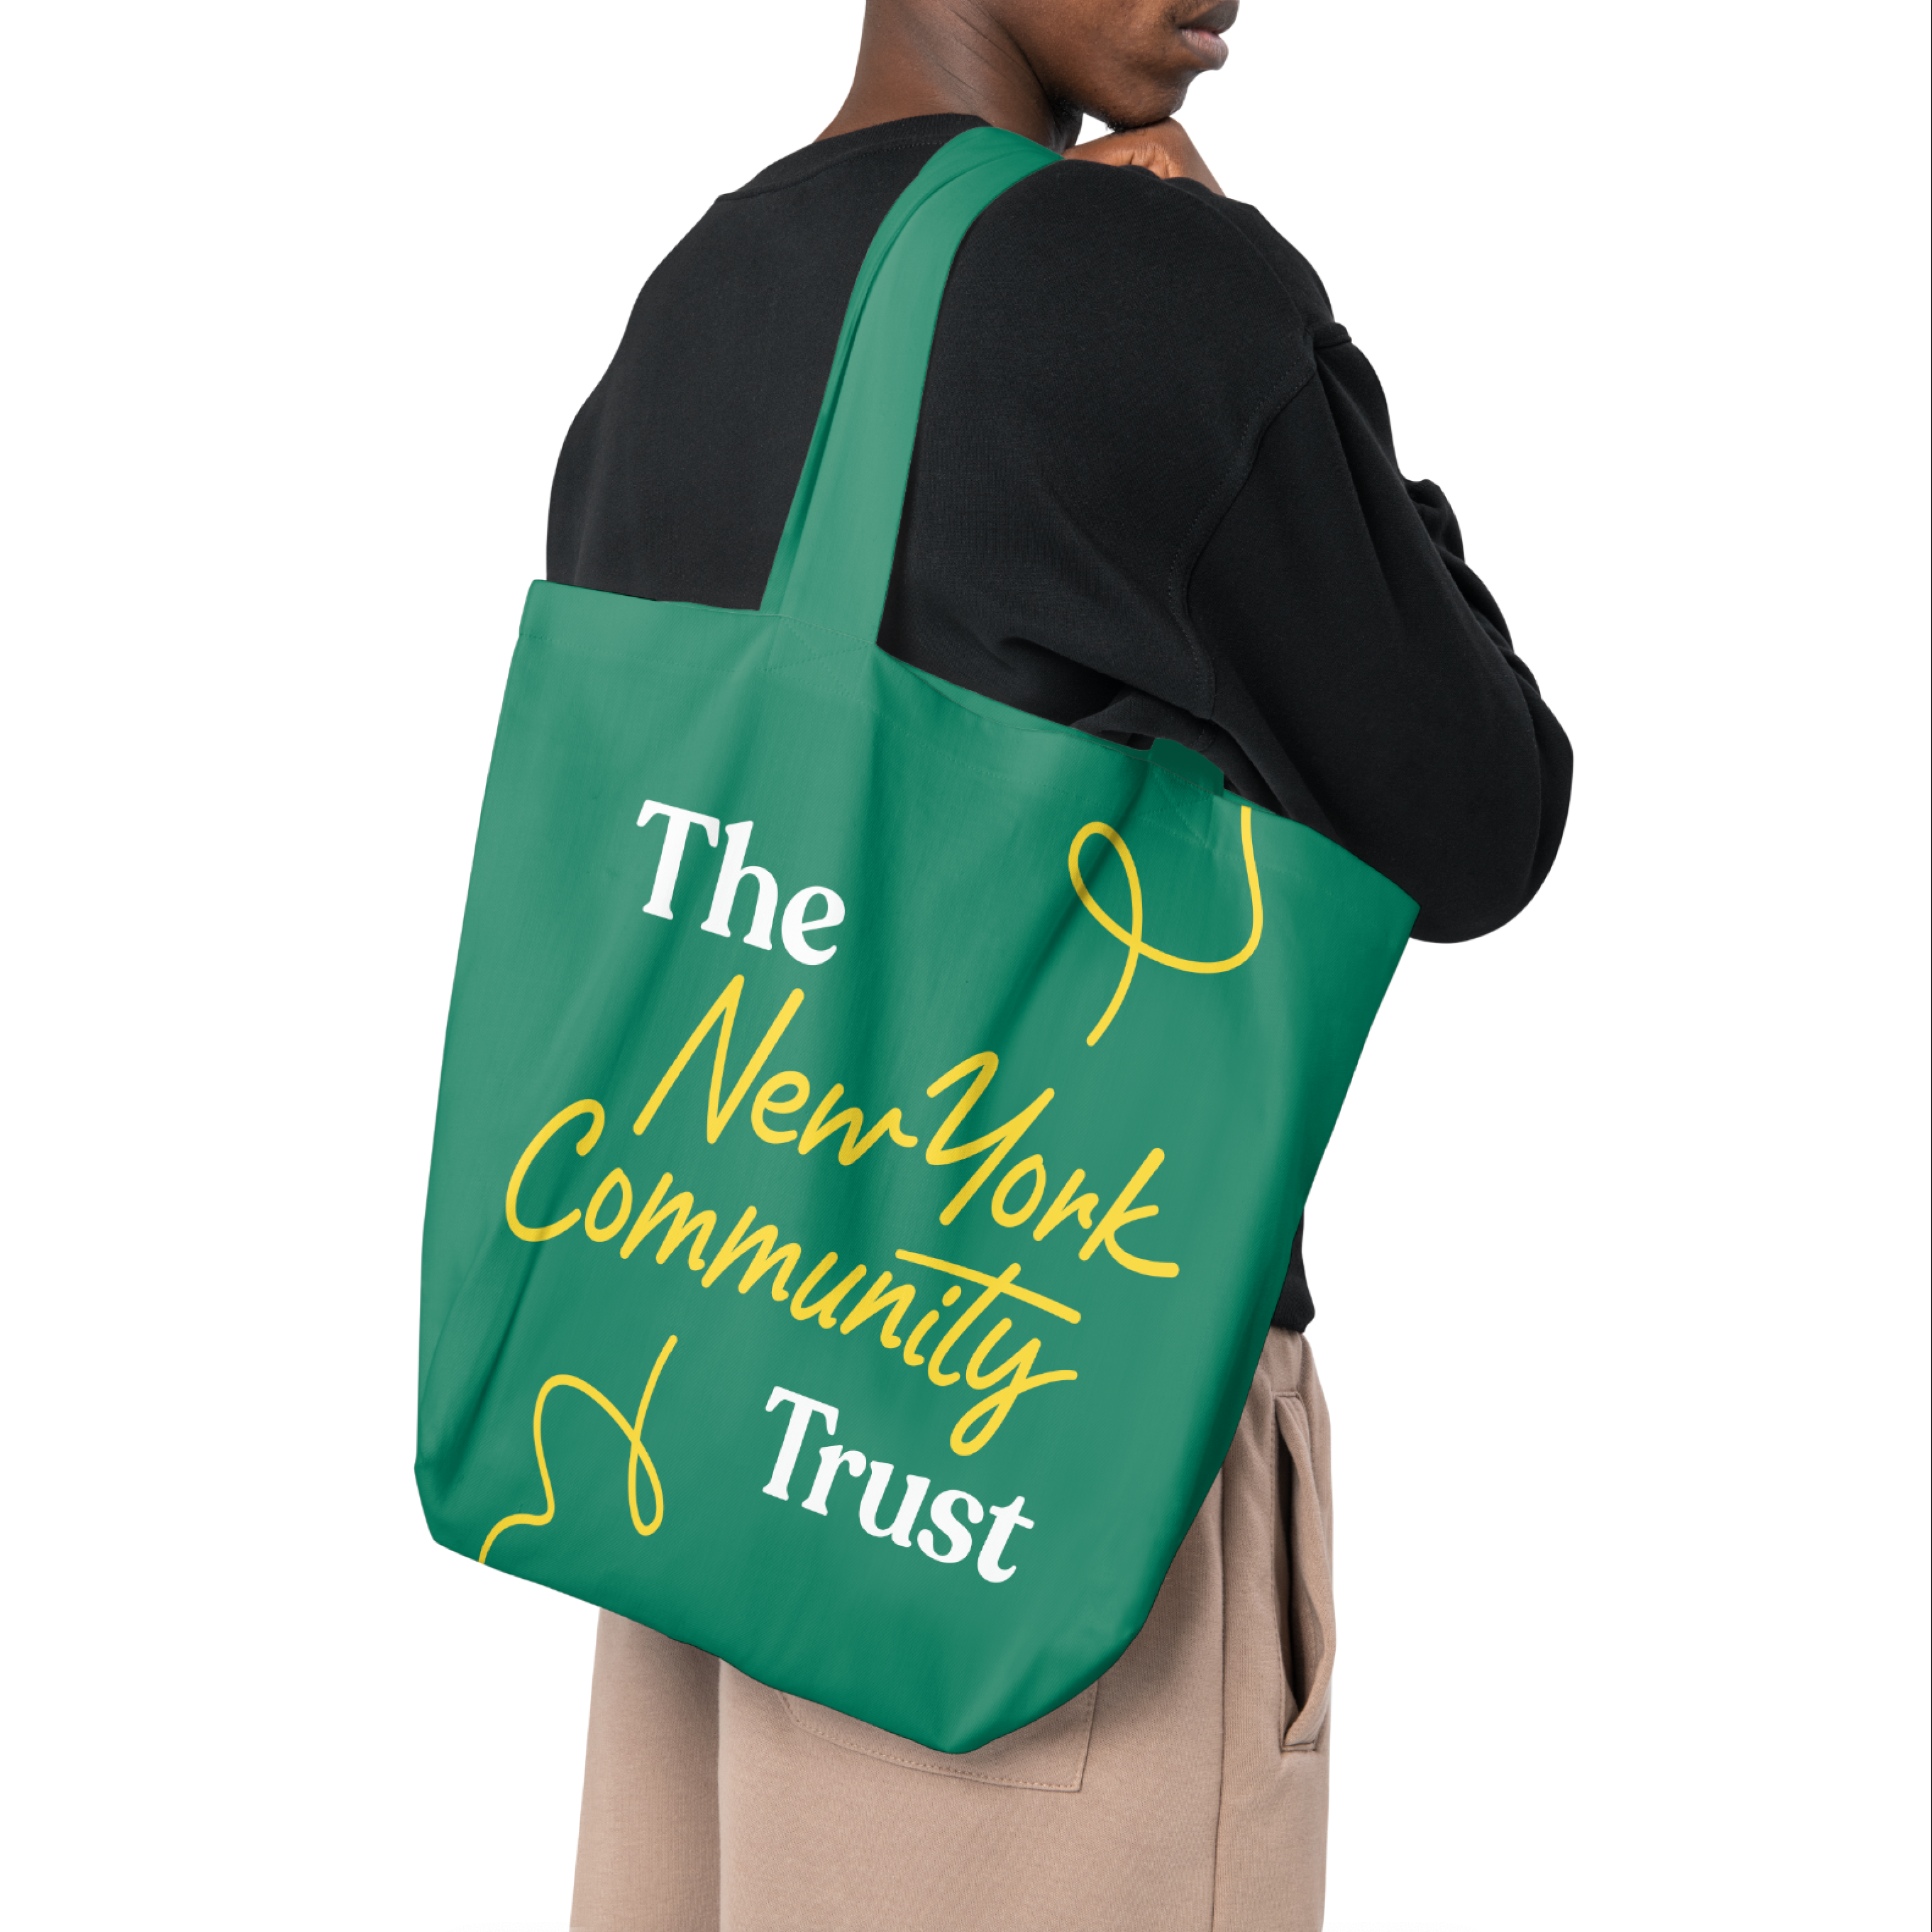 A person in a black shirt and beige pants carries a green tote bag with "The New York Community Trust" written in white and yellow text. The tote bag features a simple, stylish design with yellow cursive lines.